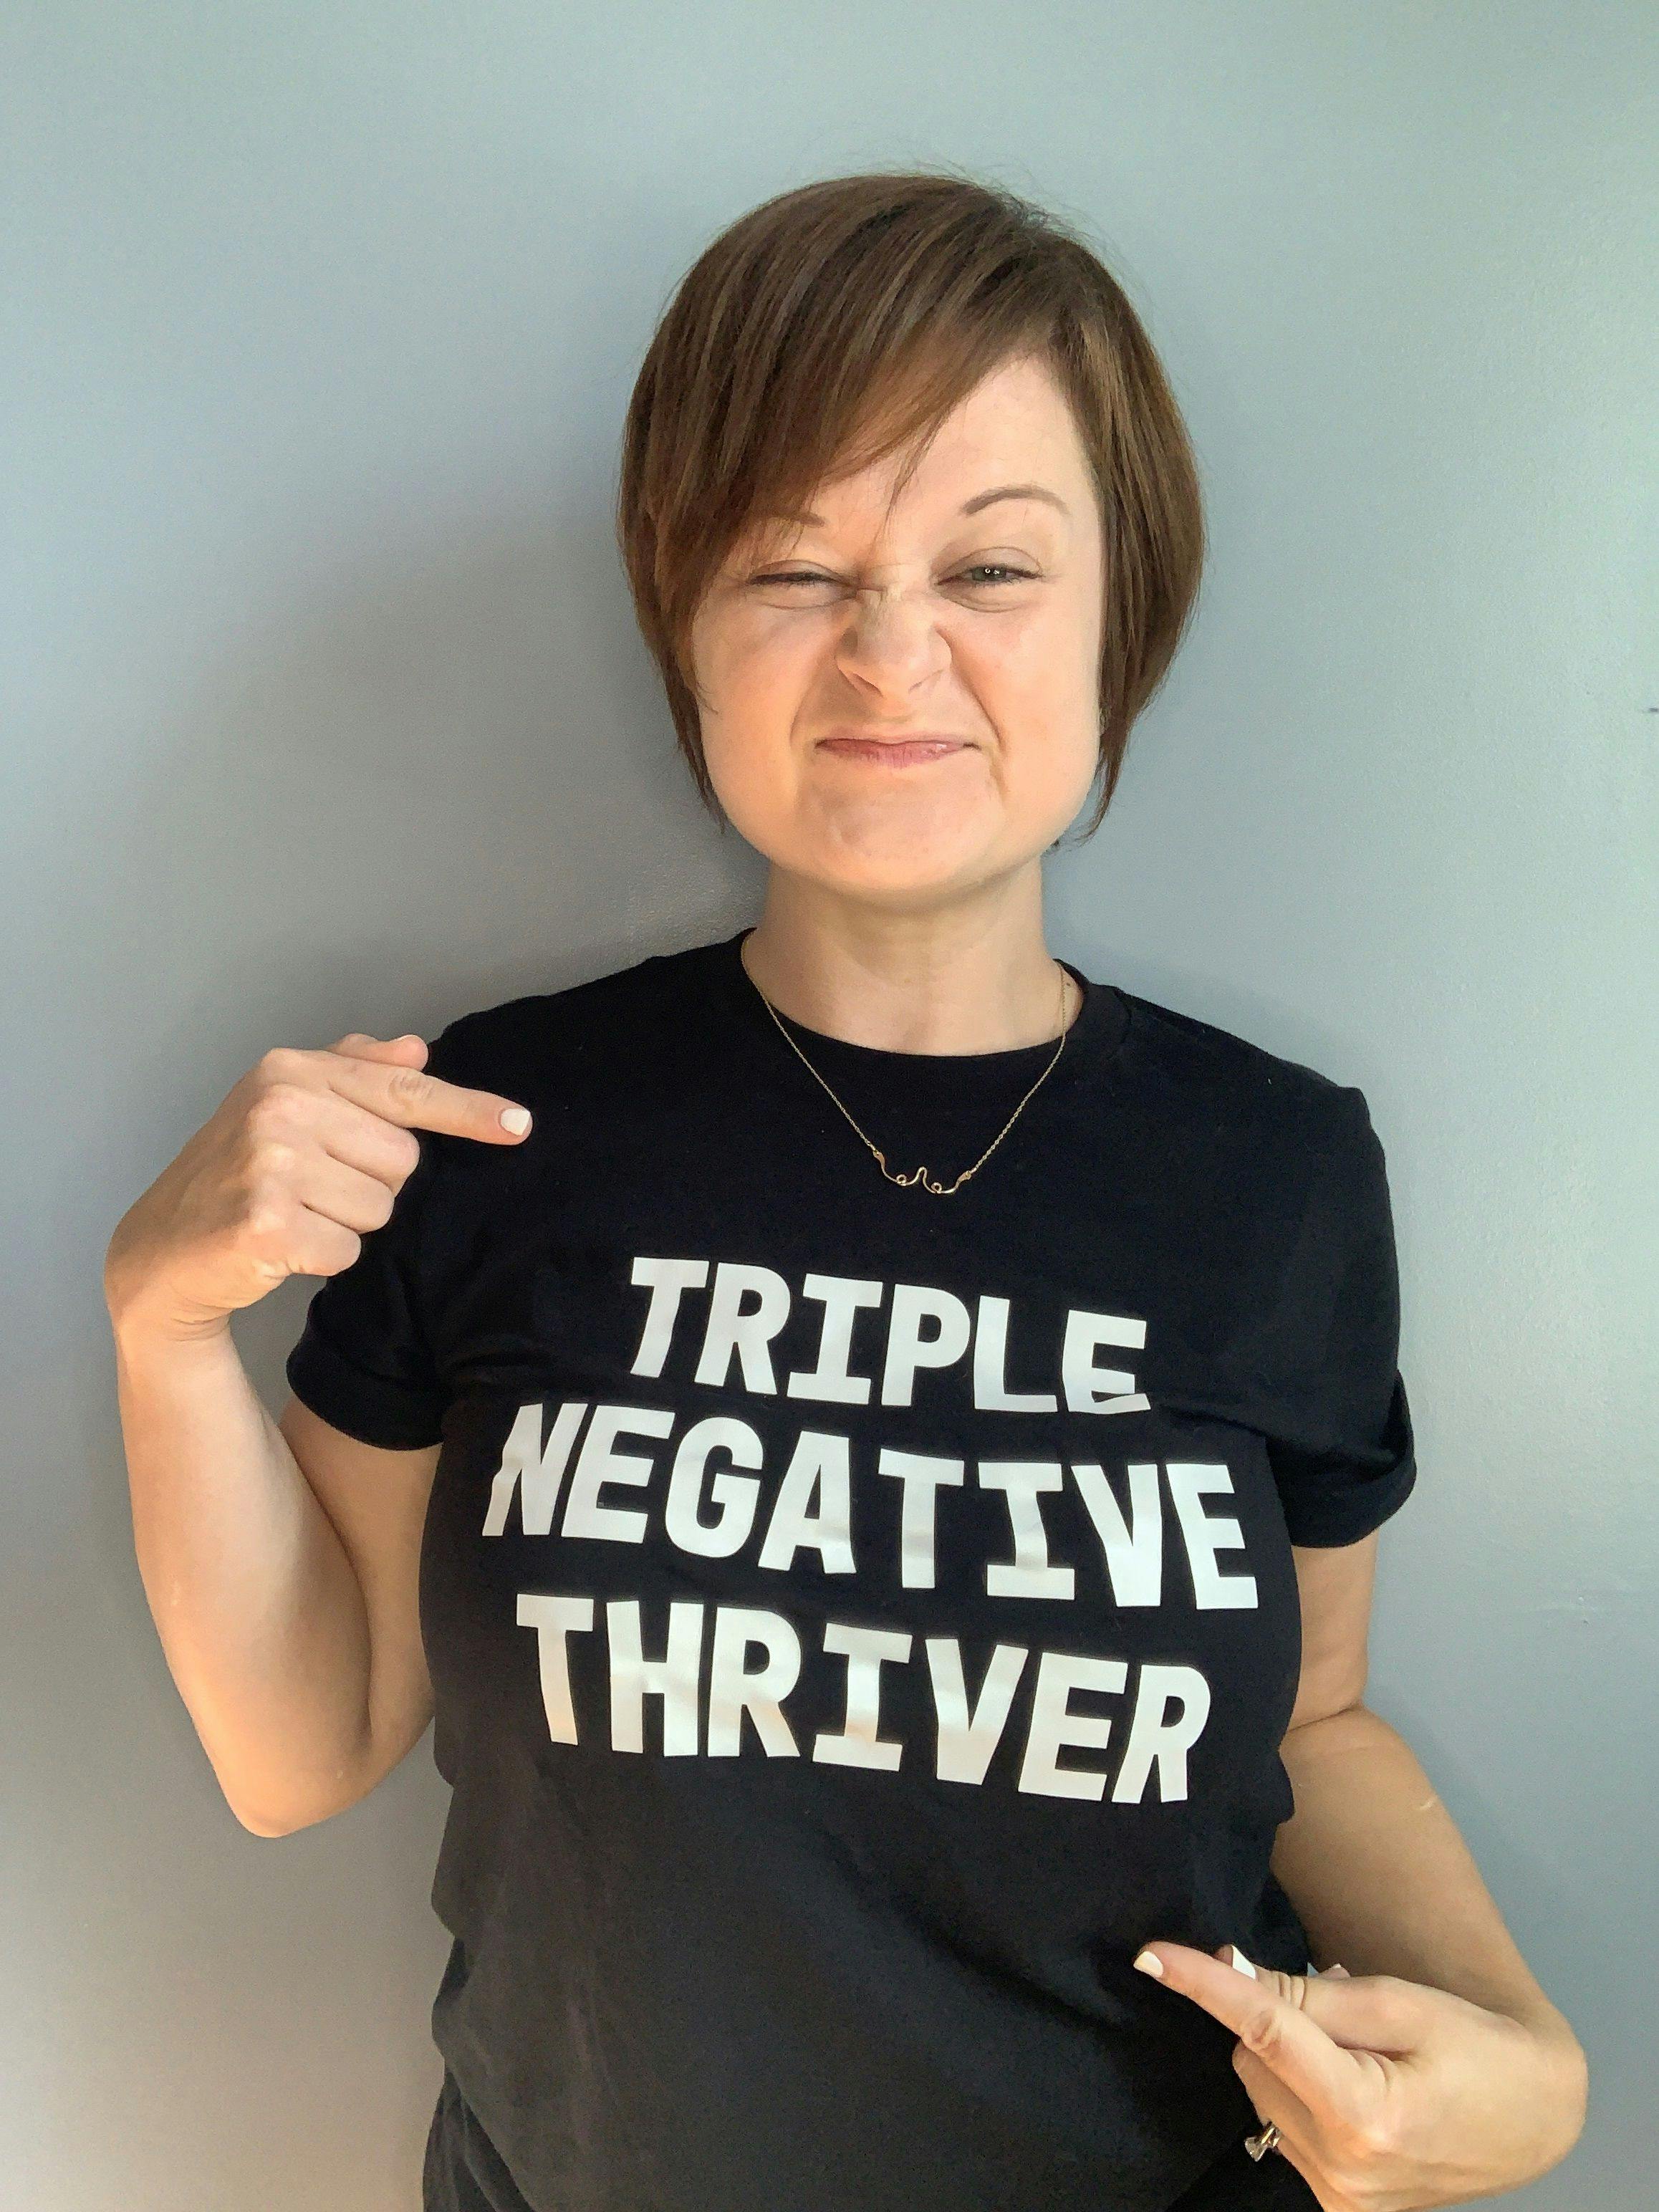 Kelly Thomas considers herself a triple-negative breast cancer thriver